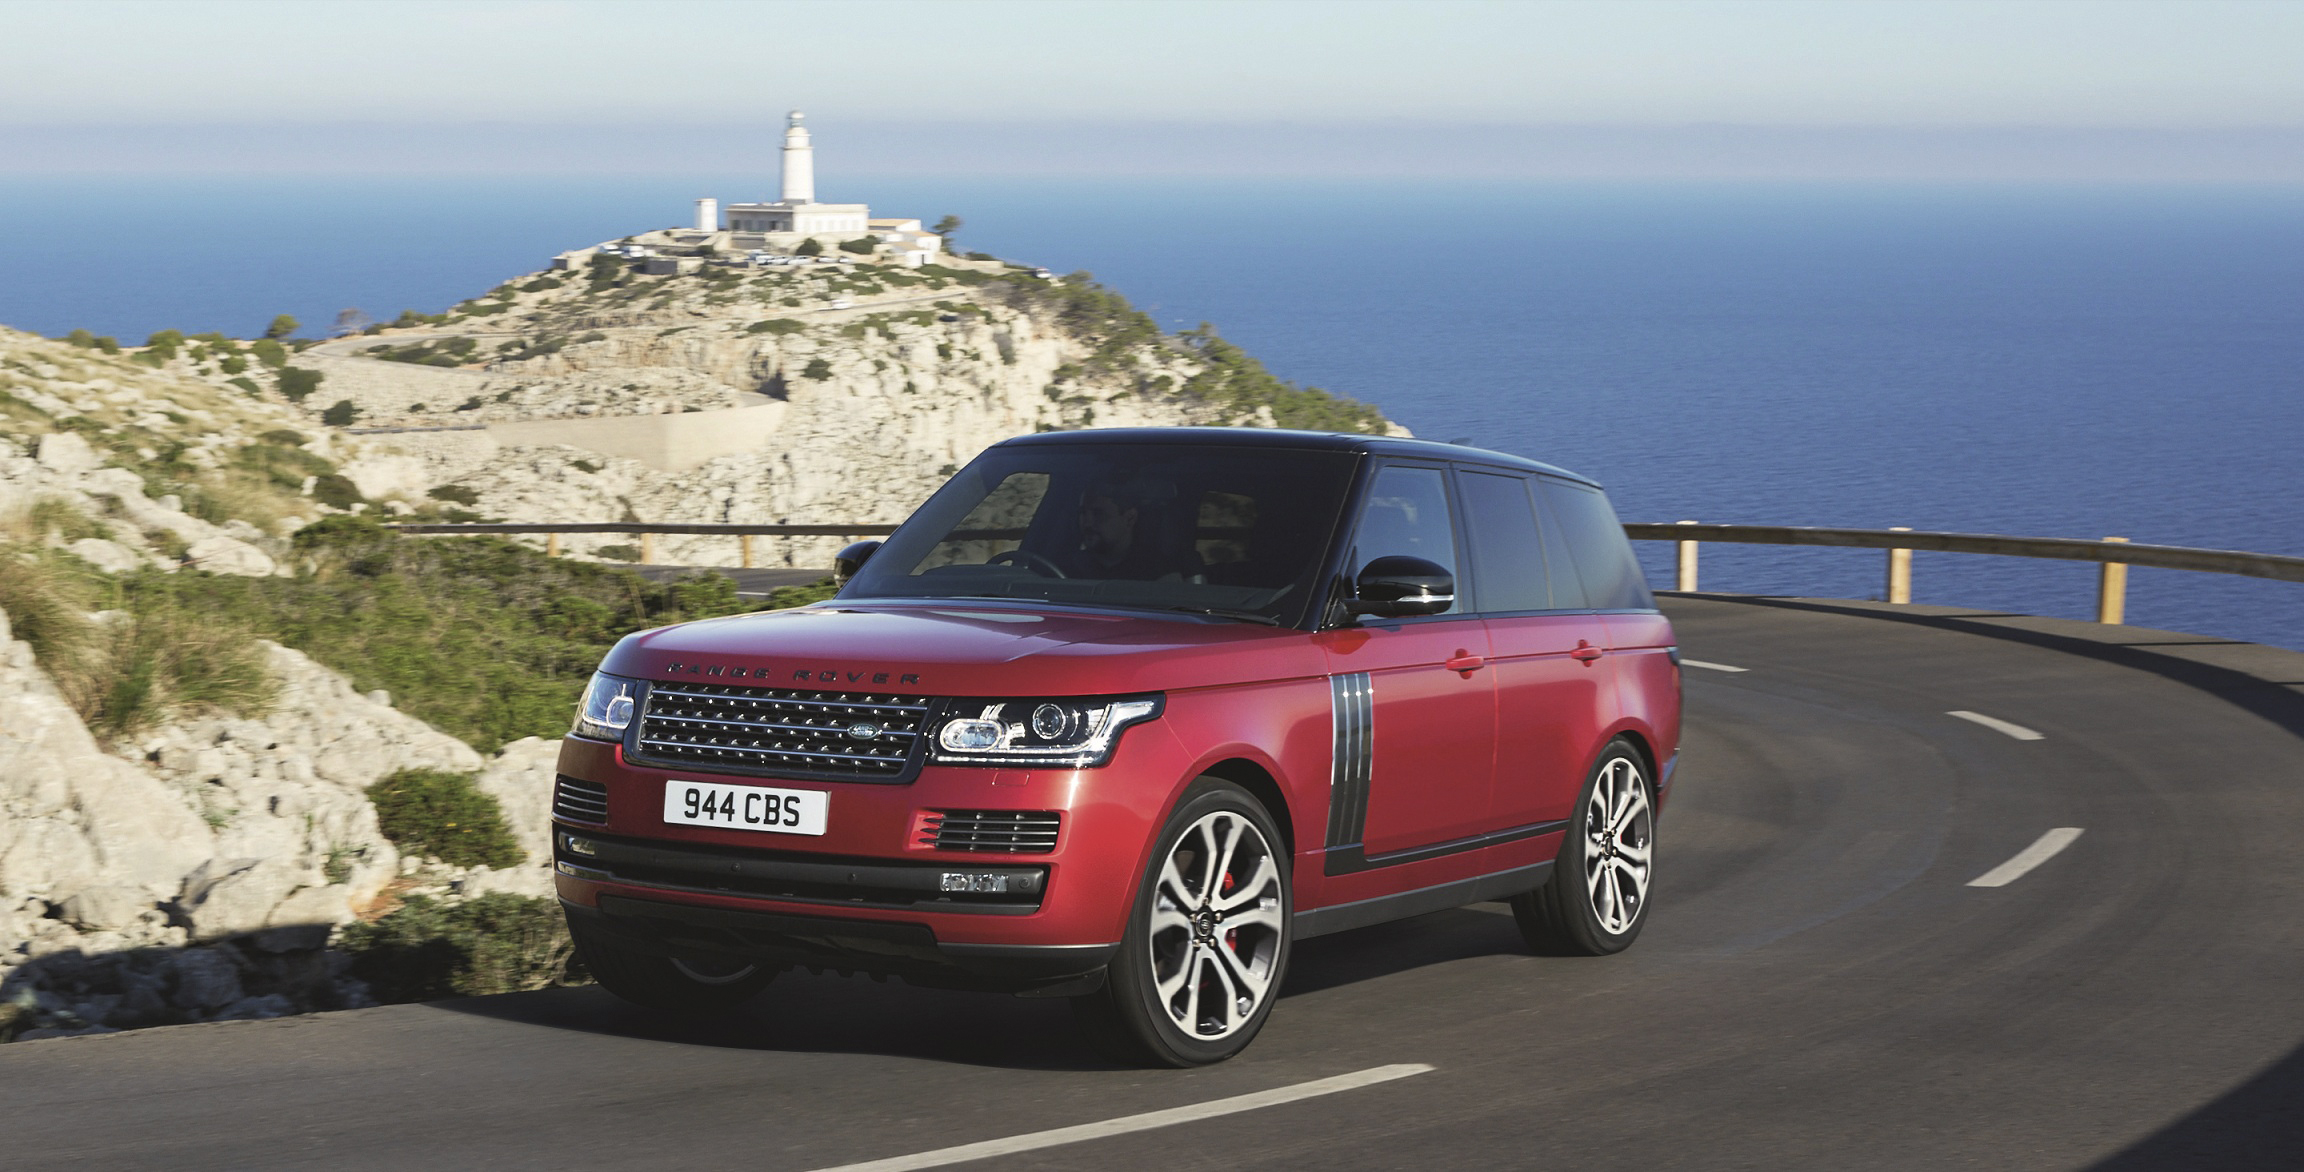 Land Rover reveals new £133,000 Range Rover | The Week UK